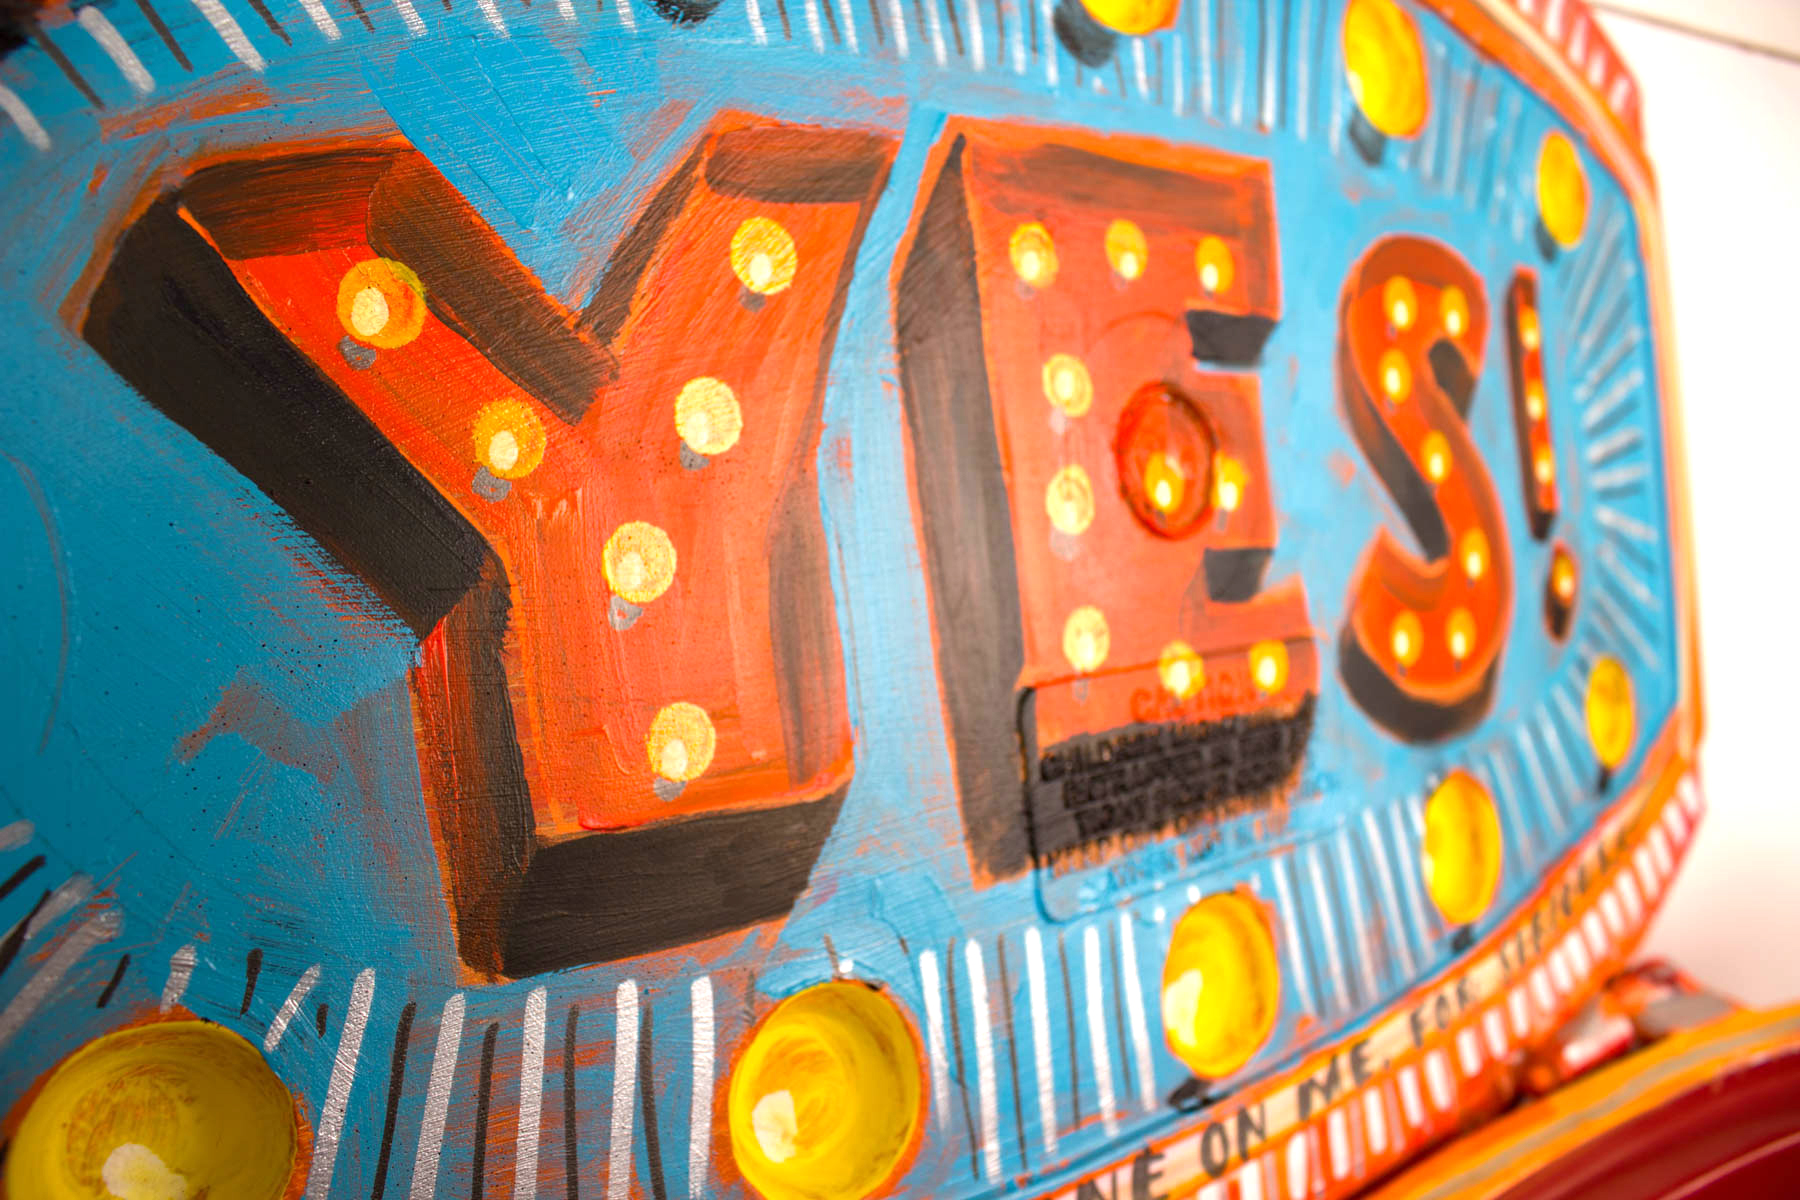 A close up of the word yes on a carnival ride.